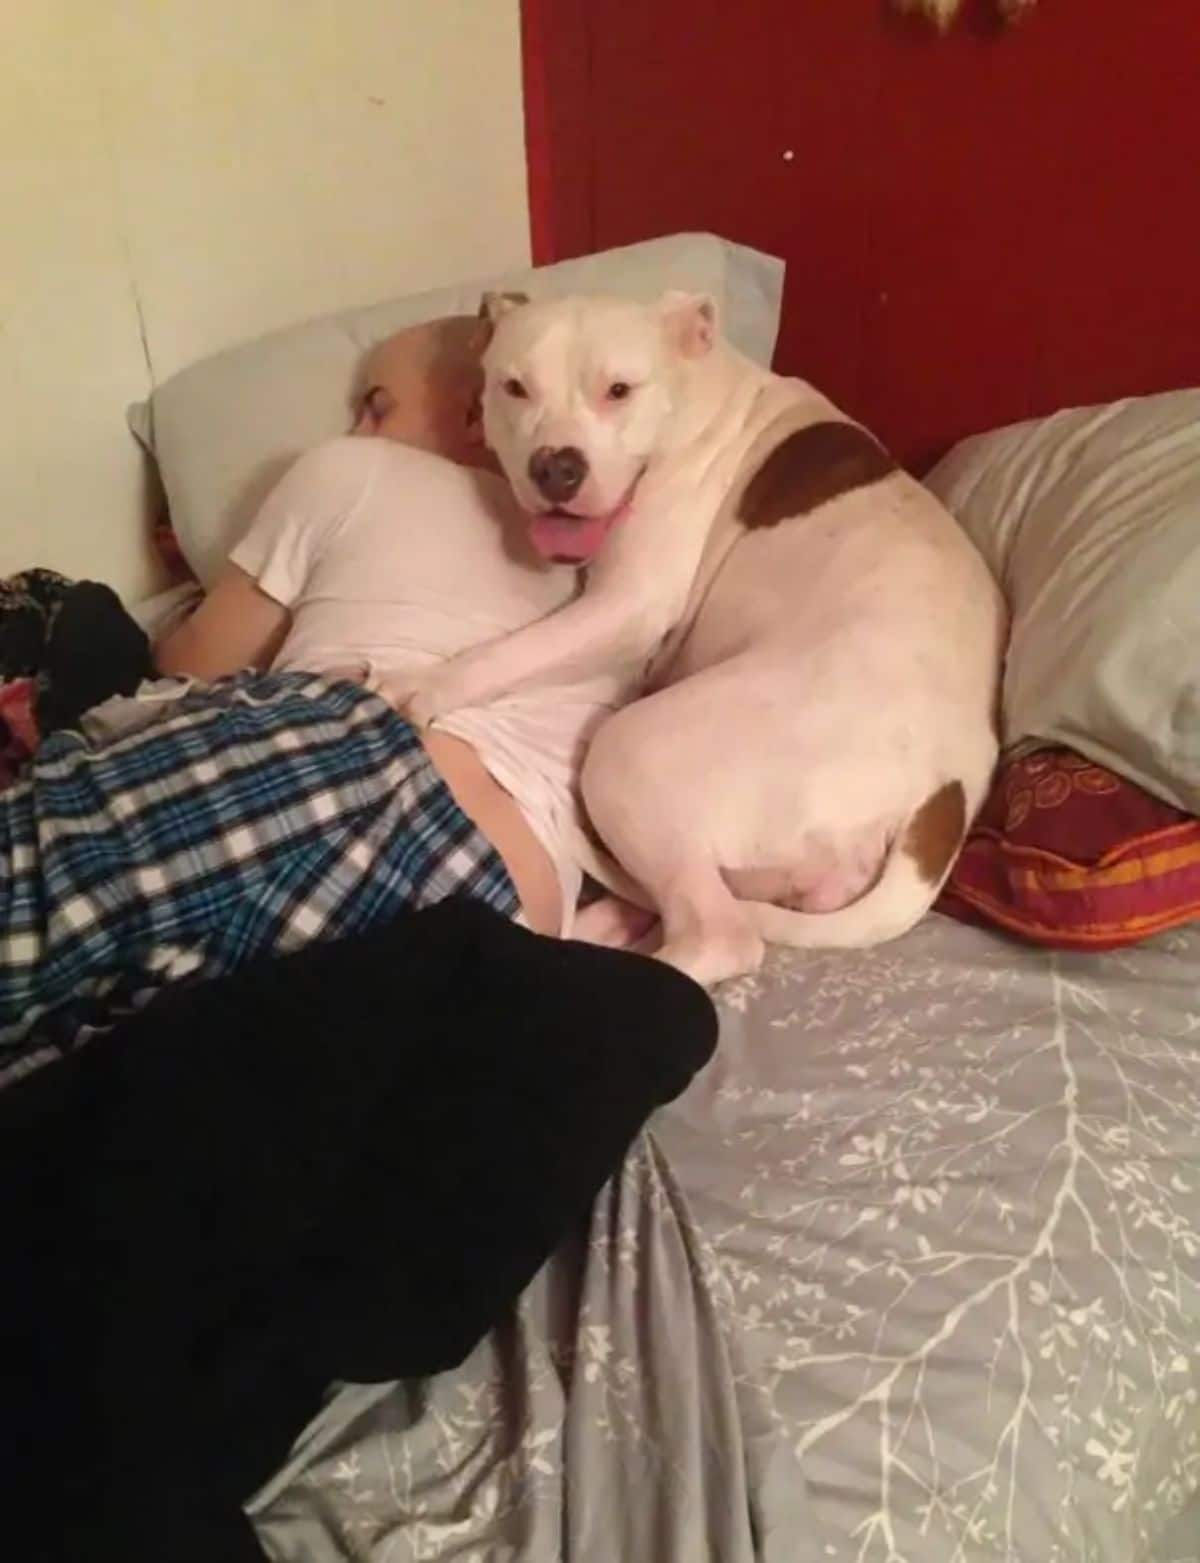 white and brown dog cuddled up against the back of a sleeping man on a bed